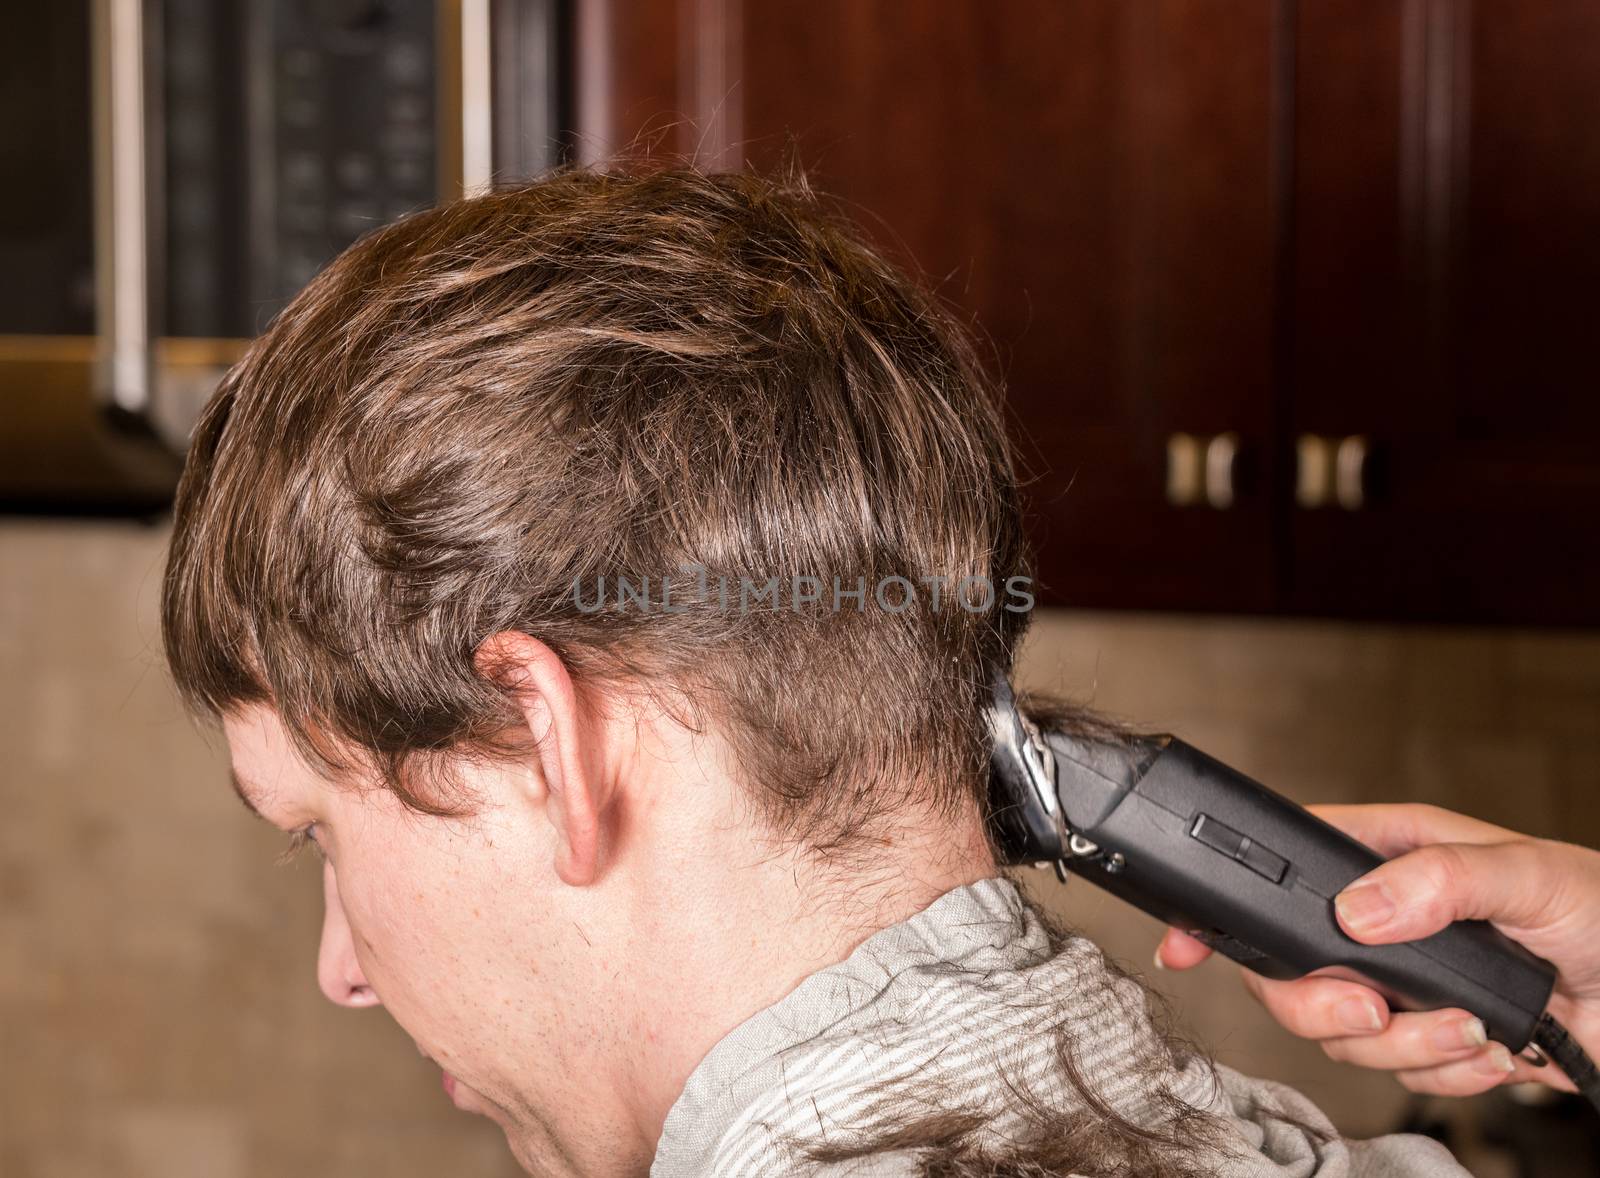 Caucasian man having hair cut in kitchen with towel around his shoulders by steheap